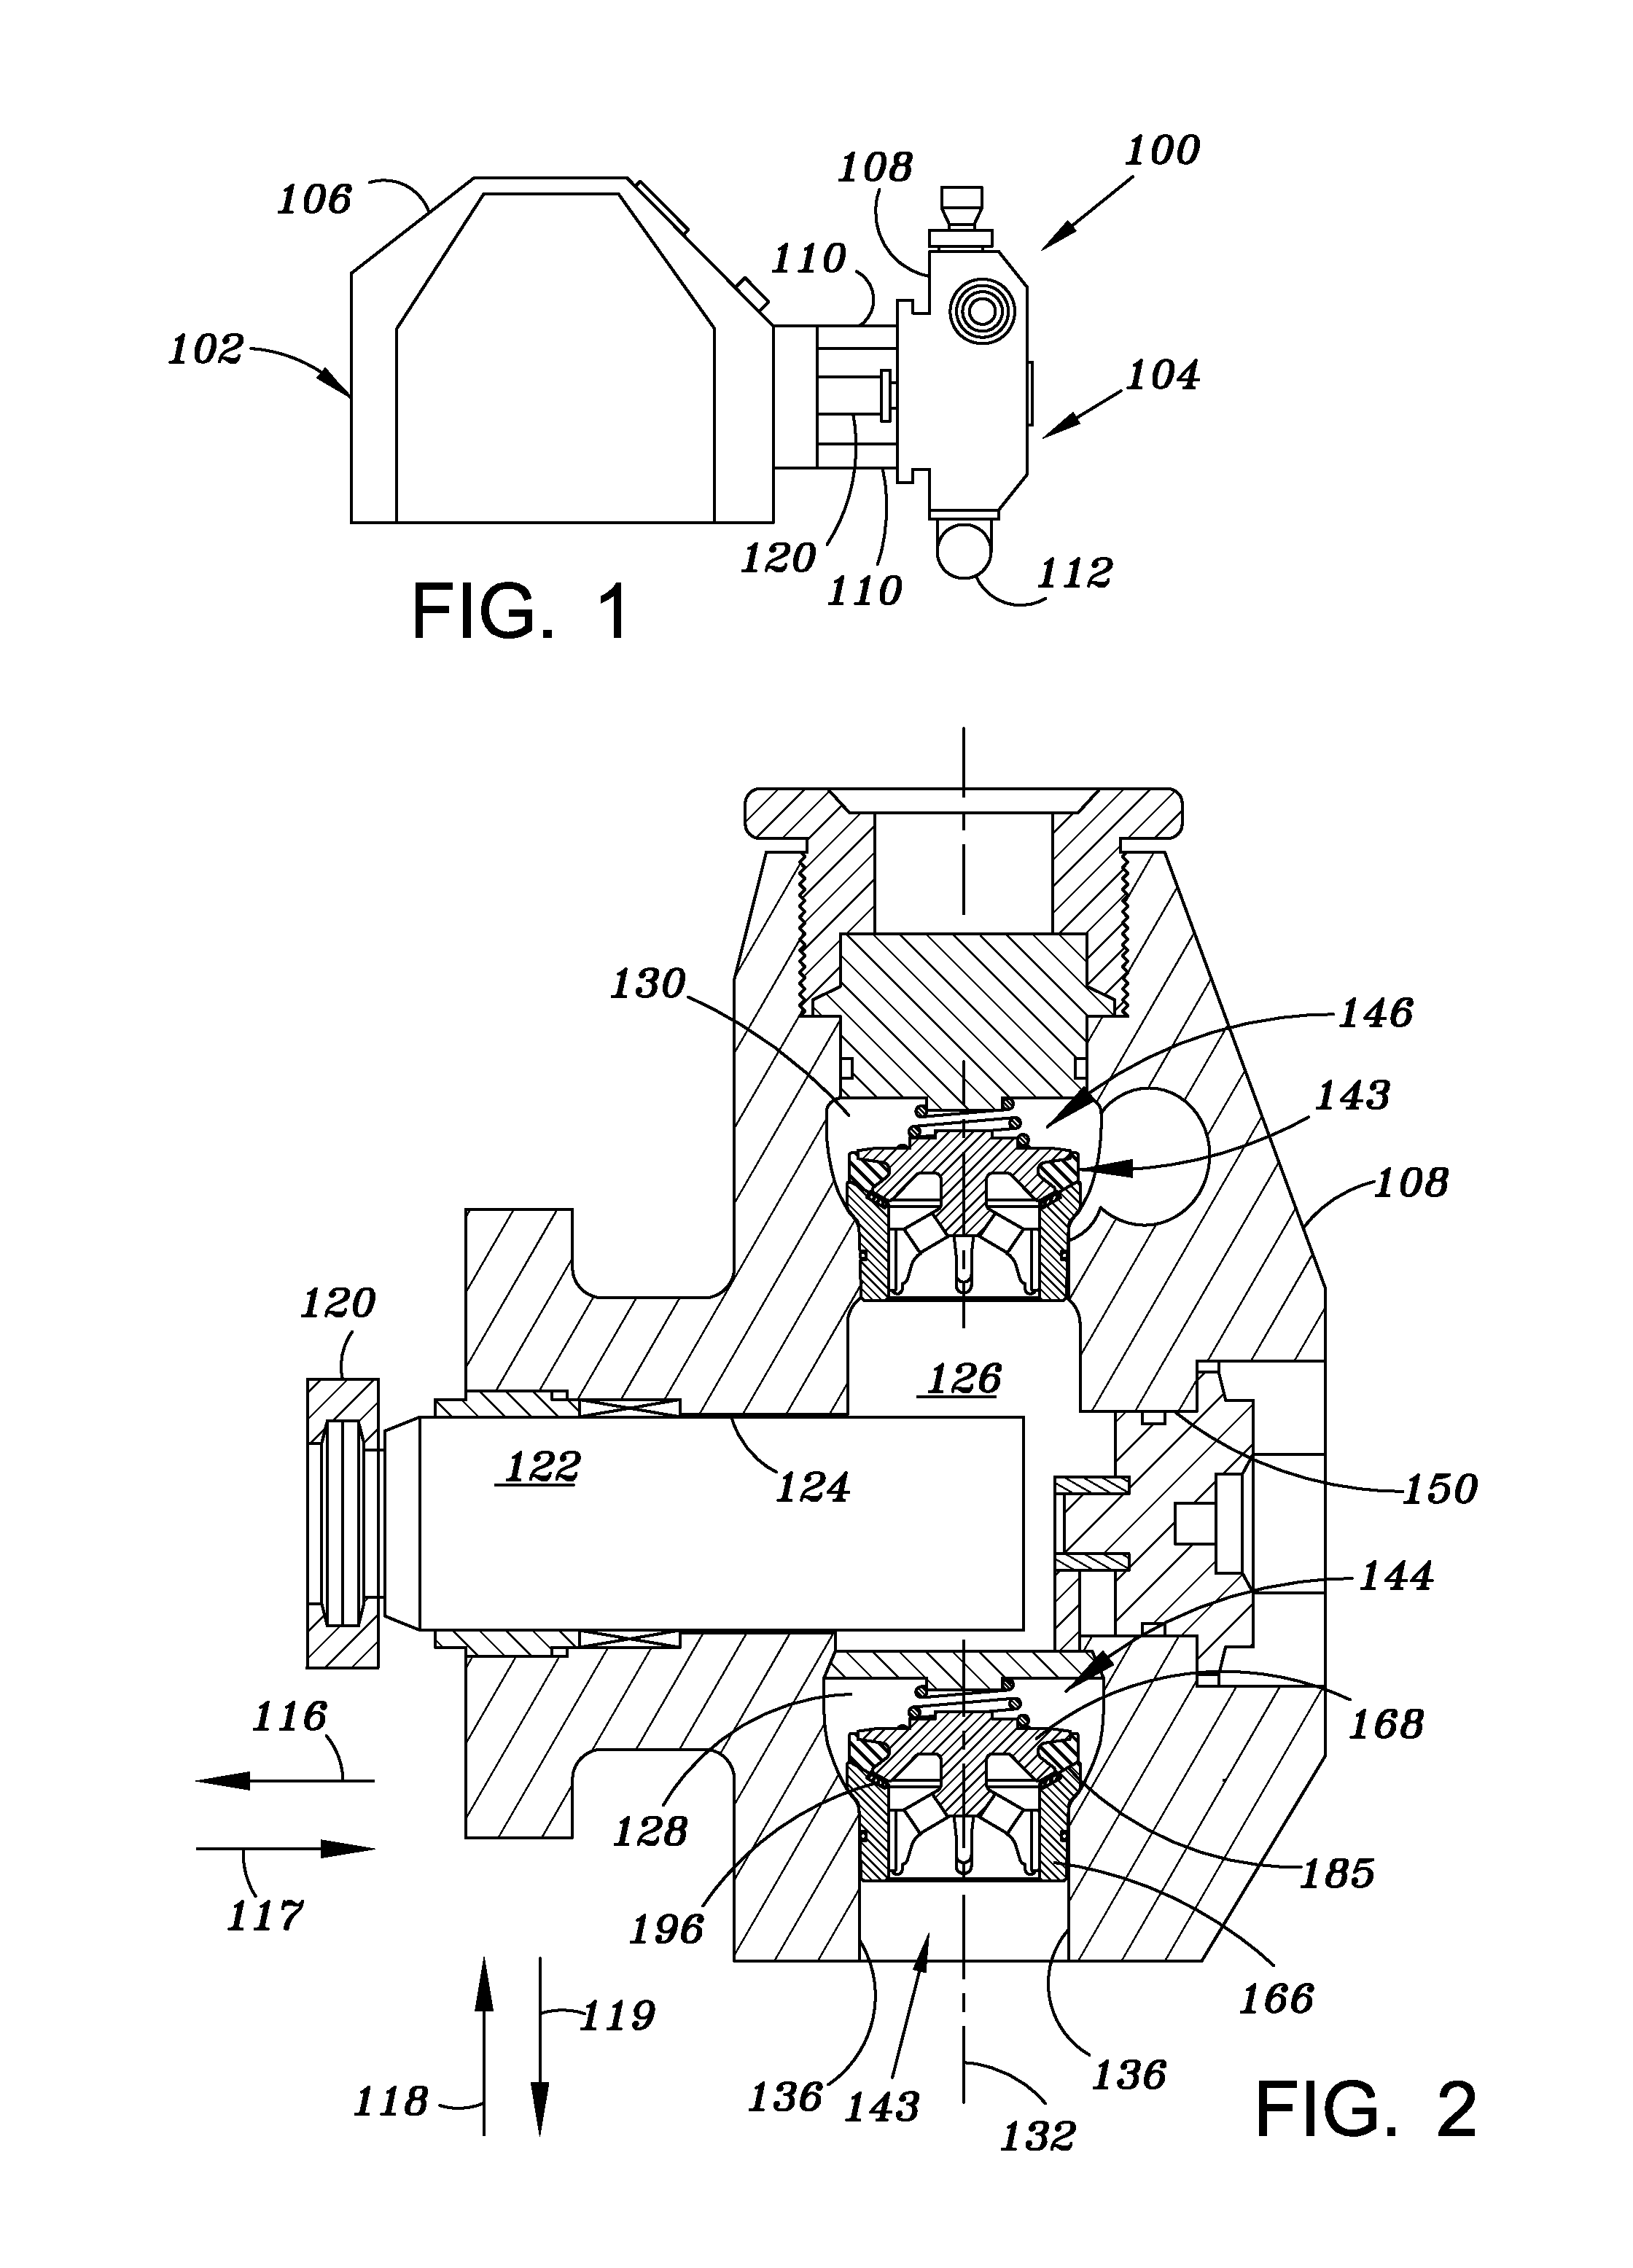 Valve seats for use in fracturing pumps